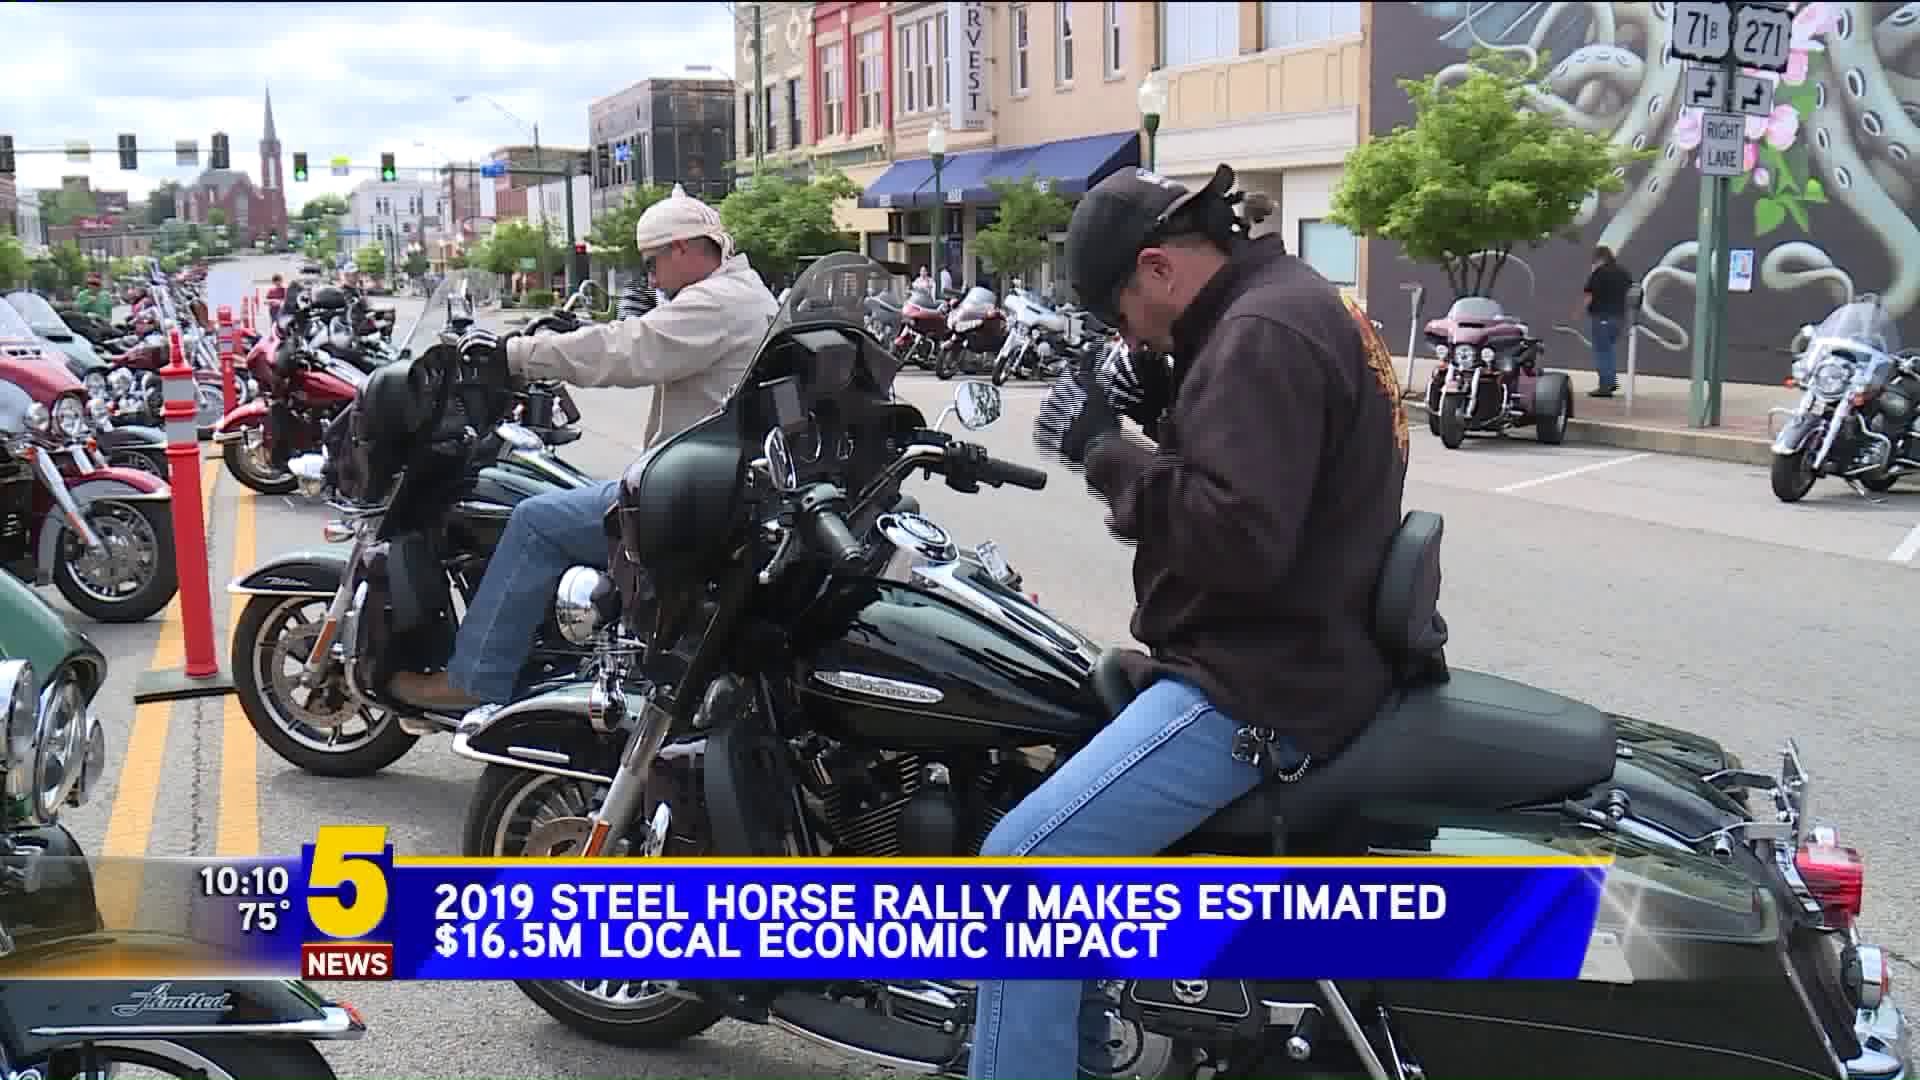 2019 Steel Horse Rally Makes Estimated $16.5M